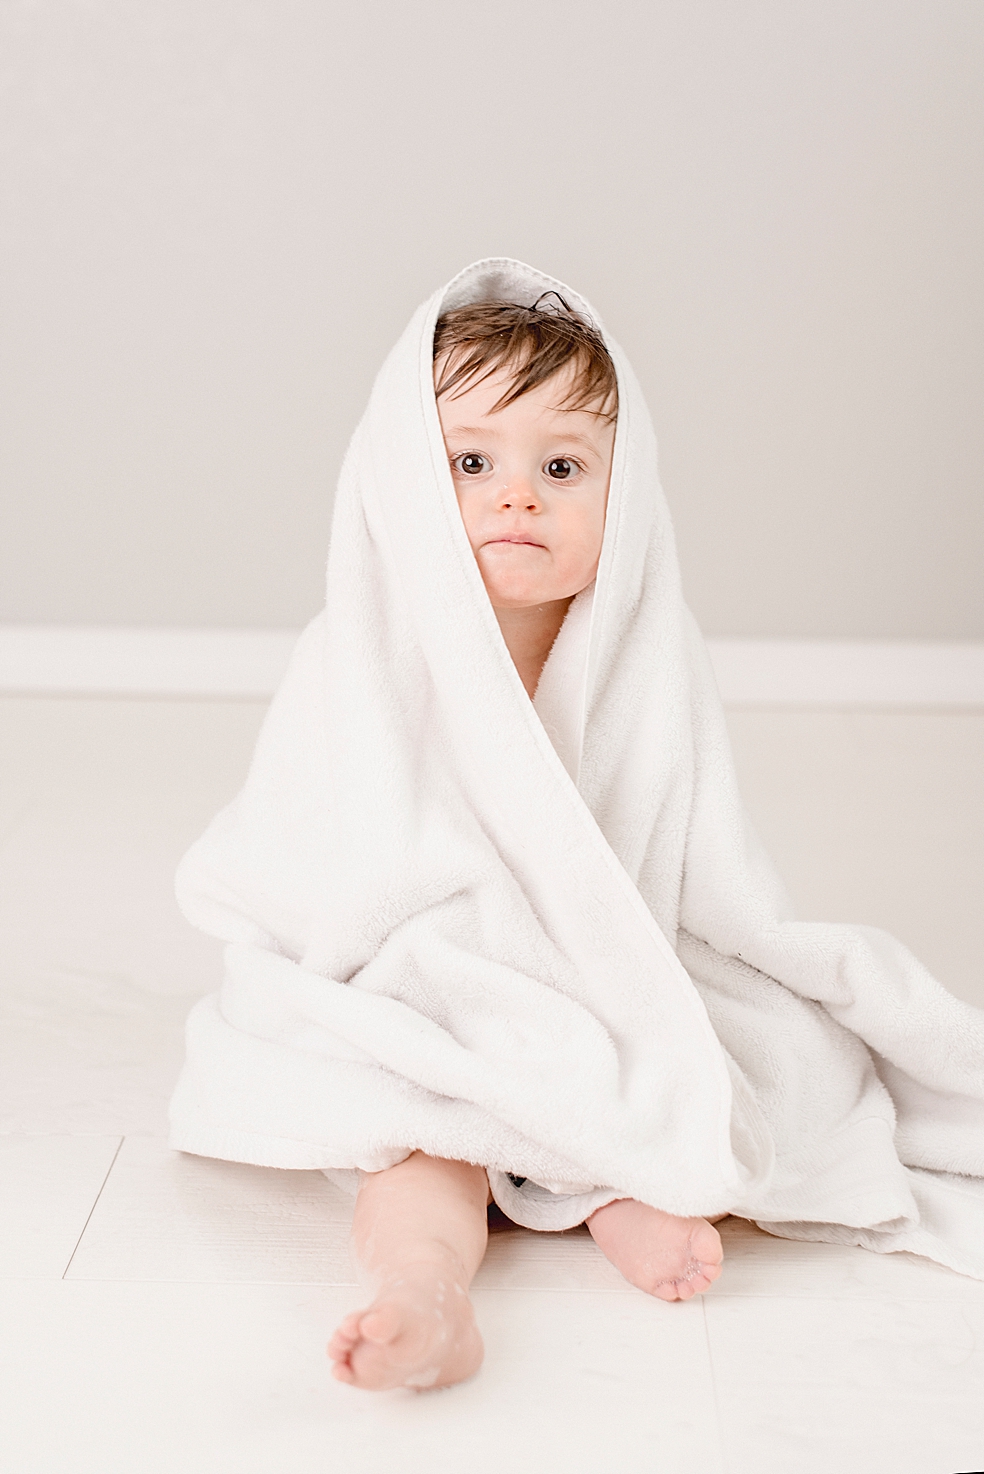 Baby boy wrapped in a towel | Photo by baby photographer South Huntsville Jessica Lee